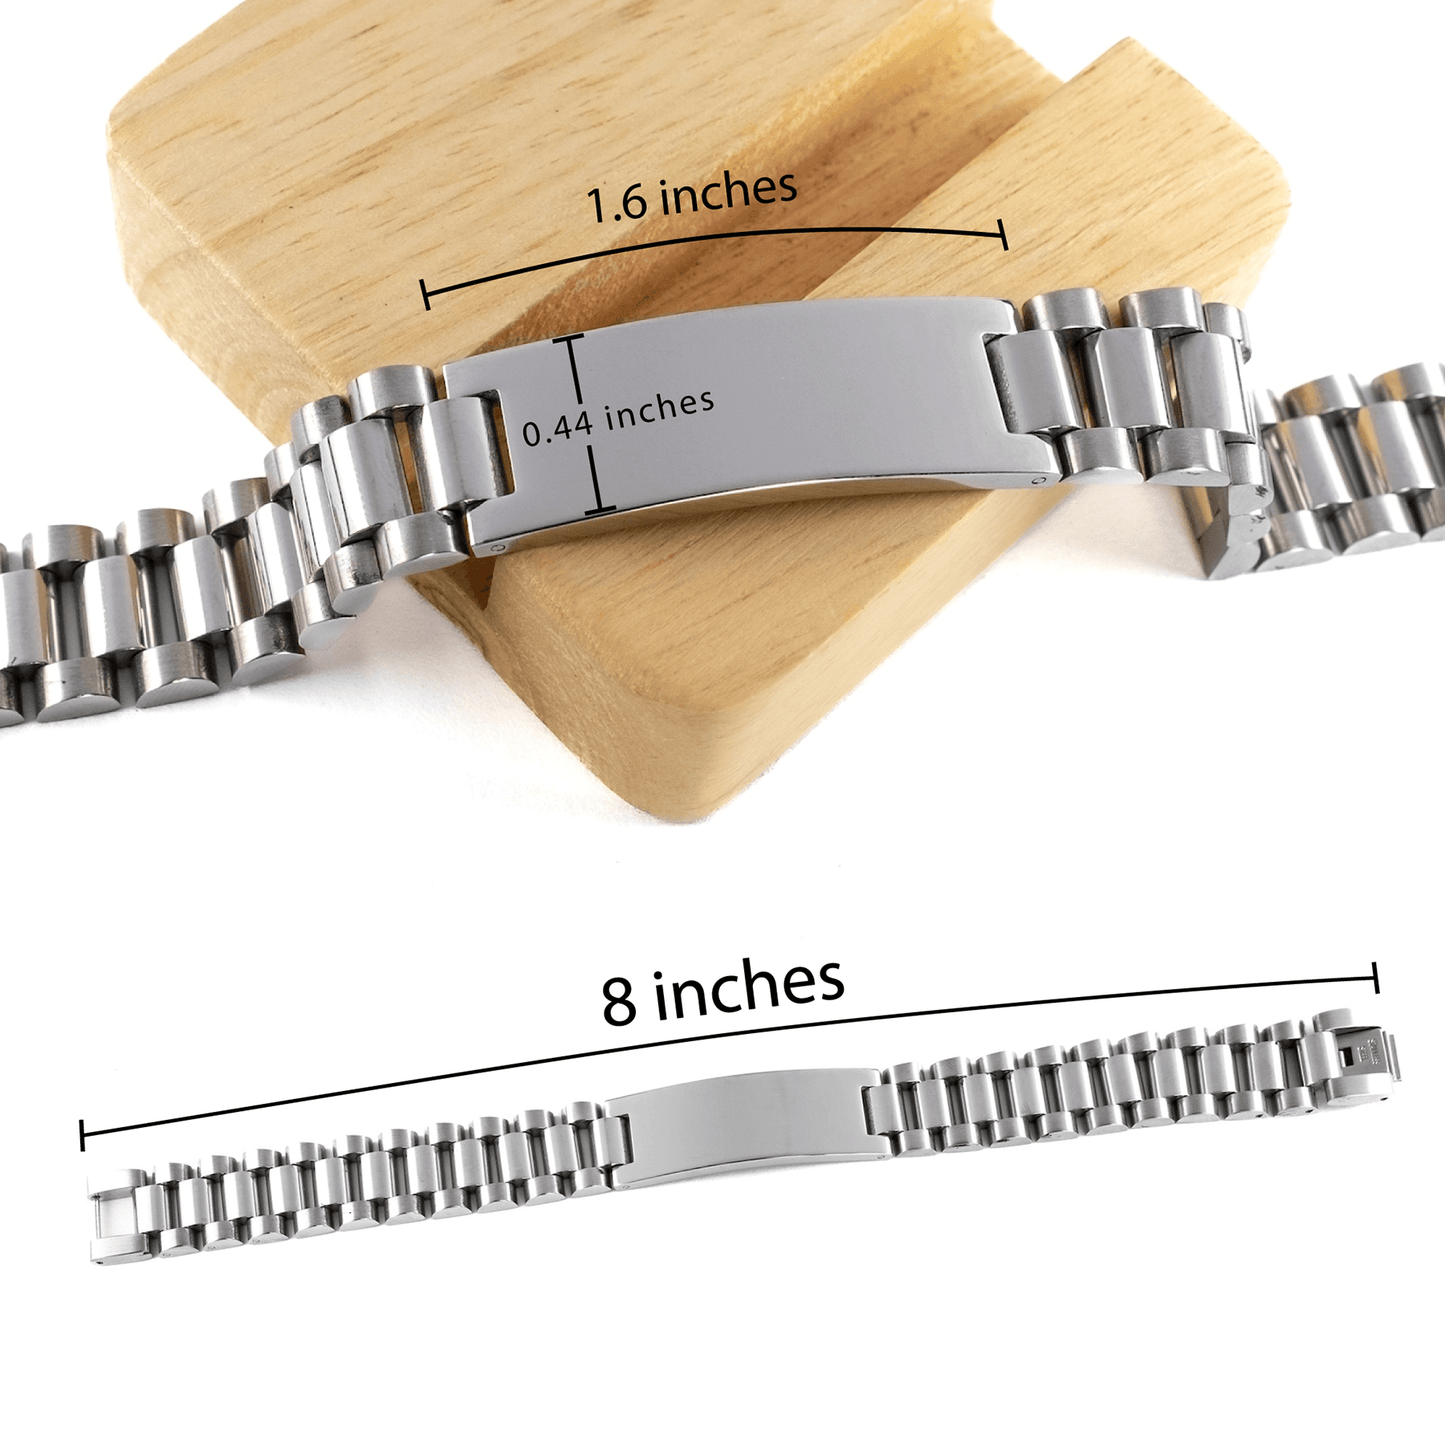 Remarkable Anesthesiologist Gifts, Your dedication and hard work, Inspirational Birthday Christmas Unique Ladder Stainless Steel Bracelet For Anesthesiologist, Coworkers, Men, Women, Friends - Mallard Moon Gift Shop